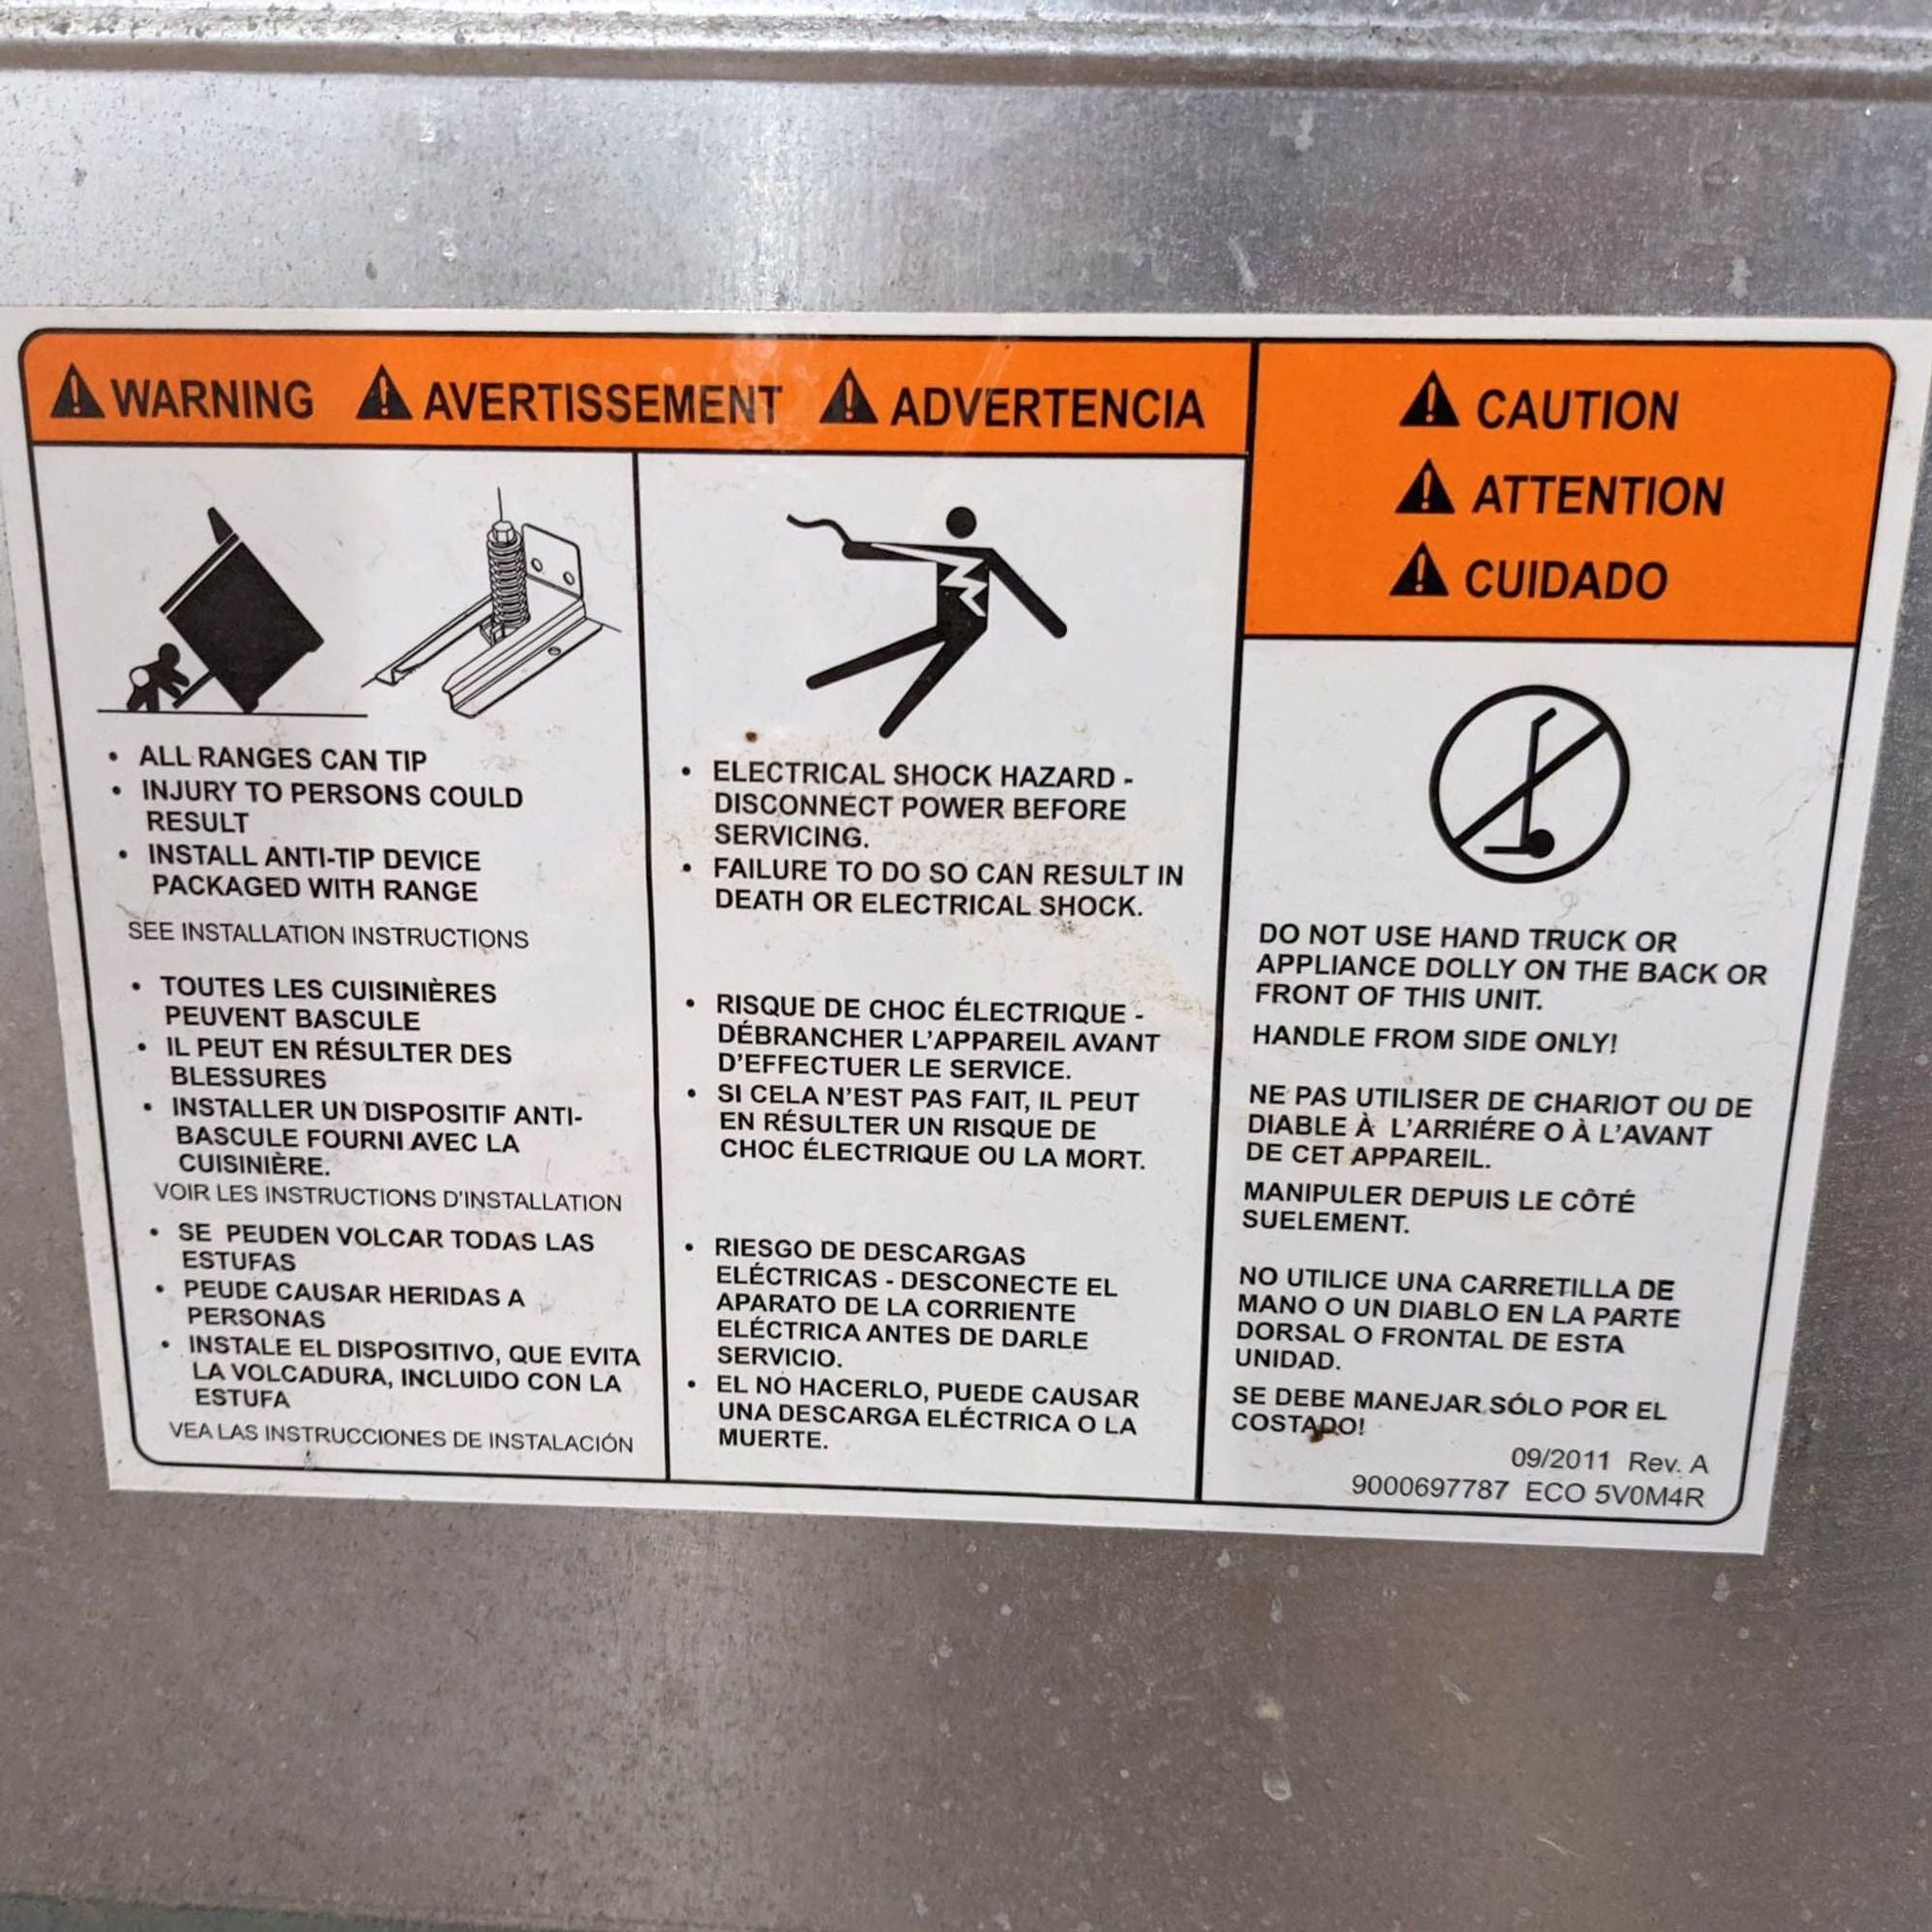 3. Close-up of warning and caution labels on a Thermador stove in English, French, and Spanish, advising against tipping and electrical hazards.